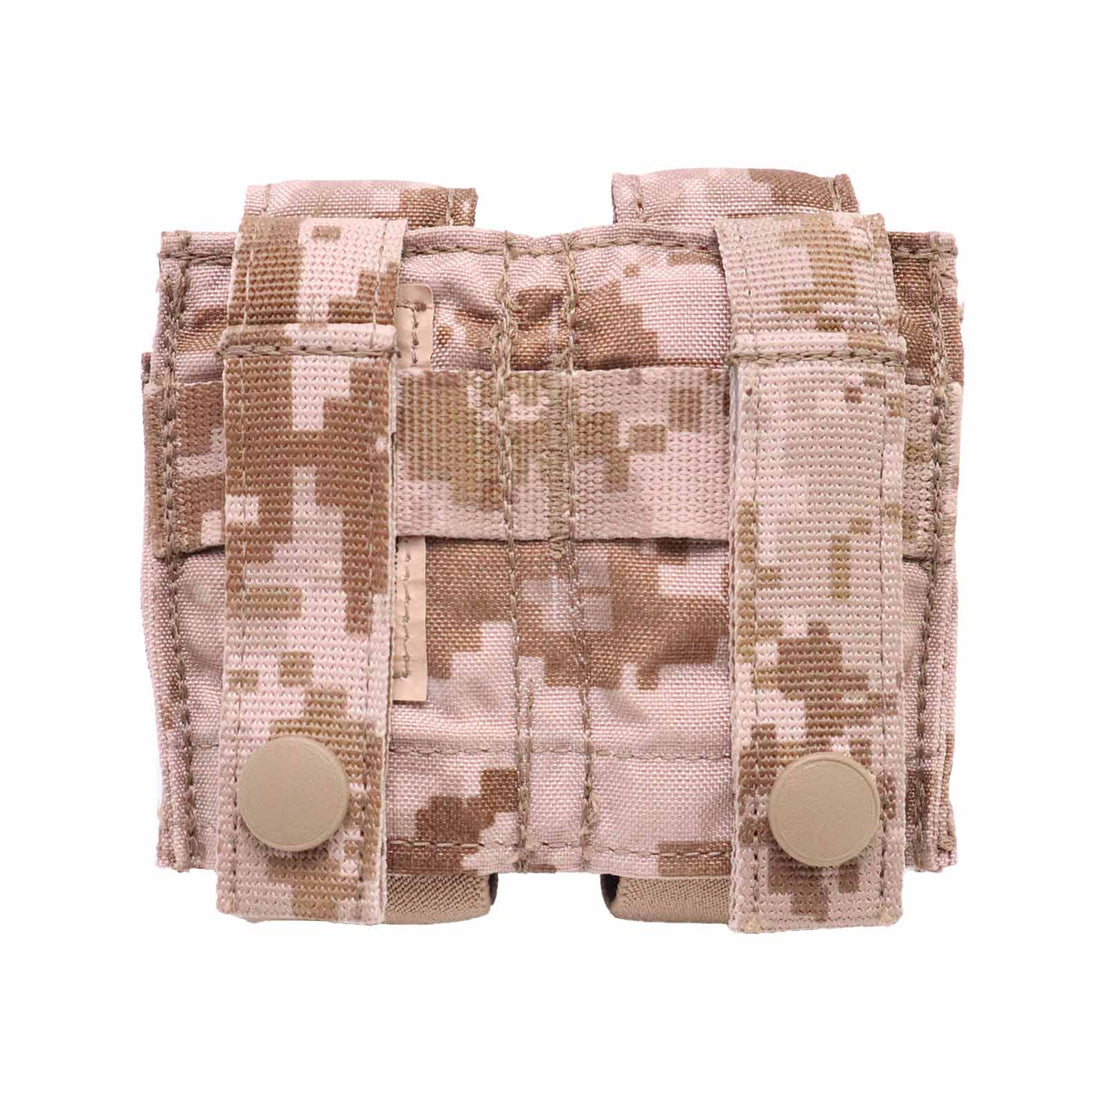 Gear - Pouches - Grenade - Eagle Industries SOFLCS Double 40MM Grenade Pouch - MOLLE - AOR1